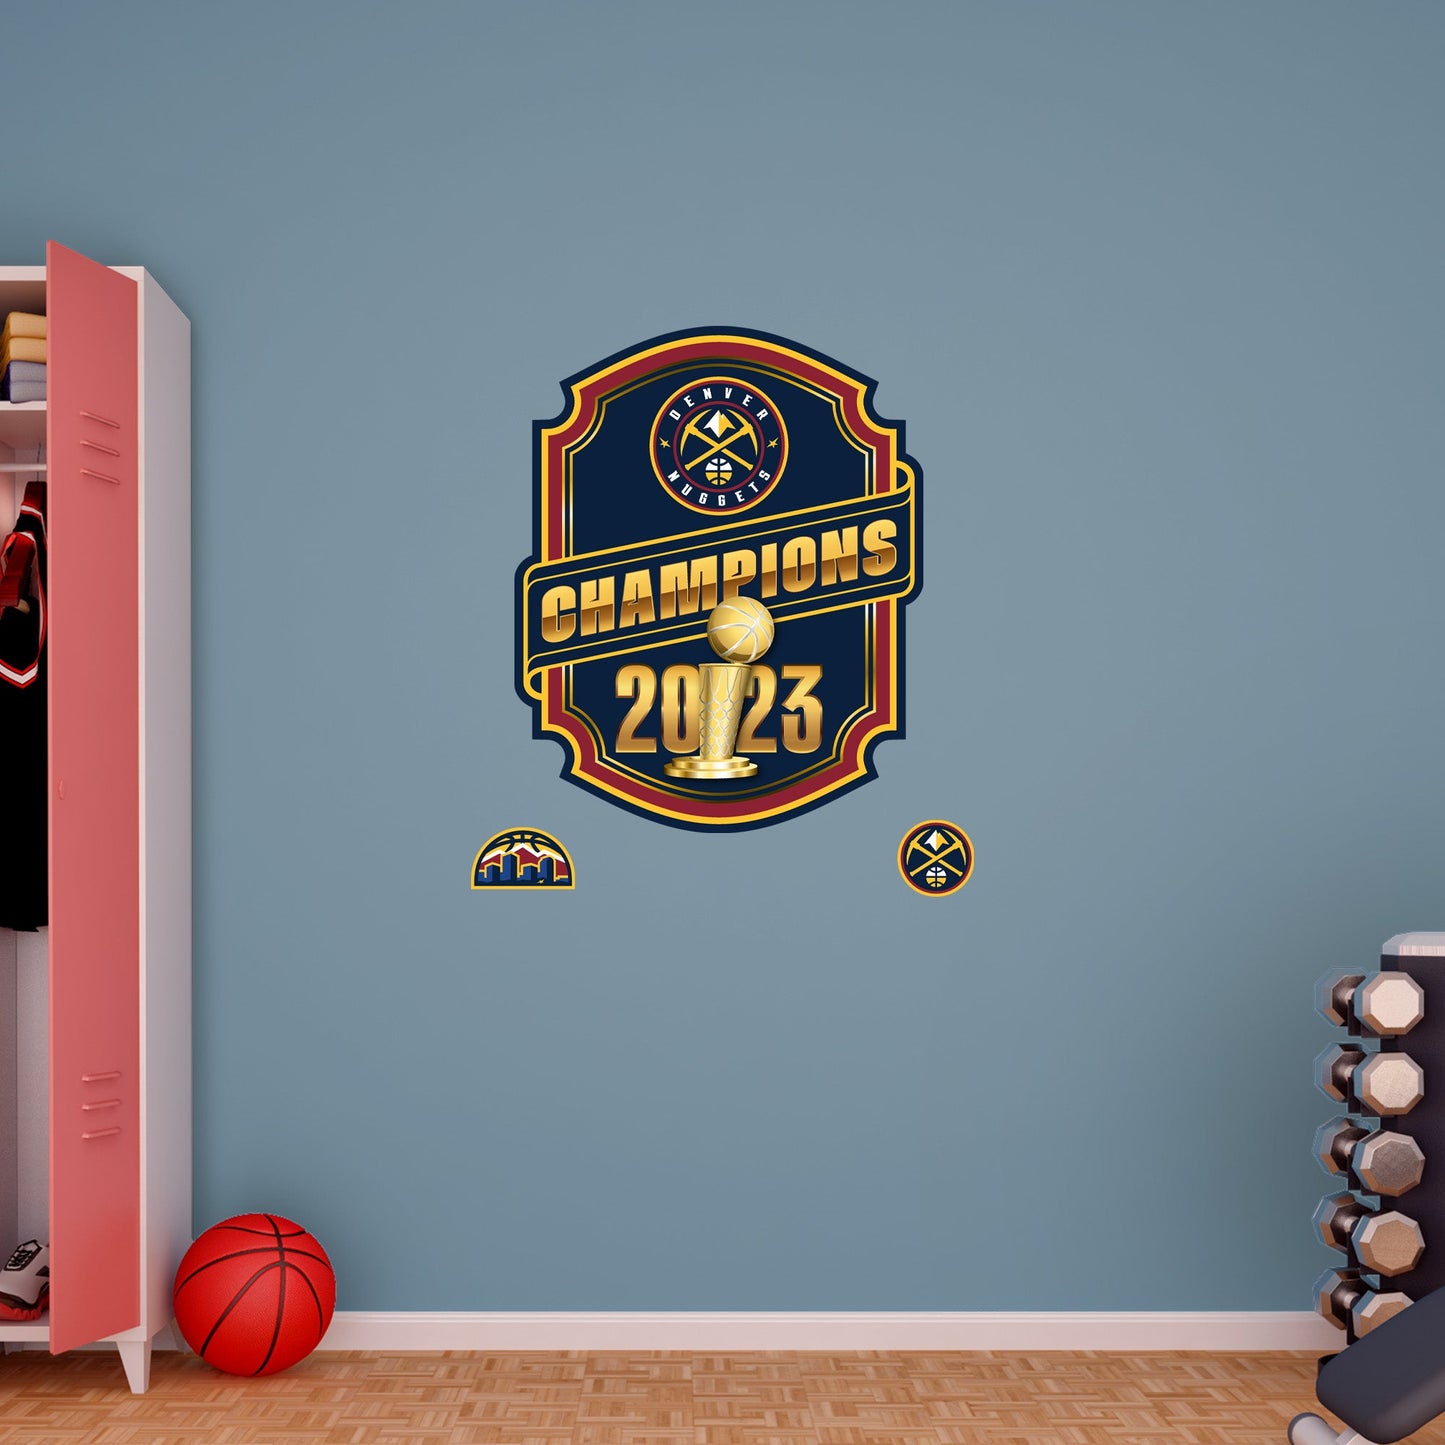 Denver Nuggets: 2023 Champions Logo - Officially Licensed NBA Removable Adhesive Decal